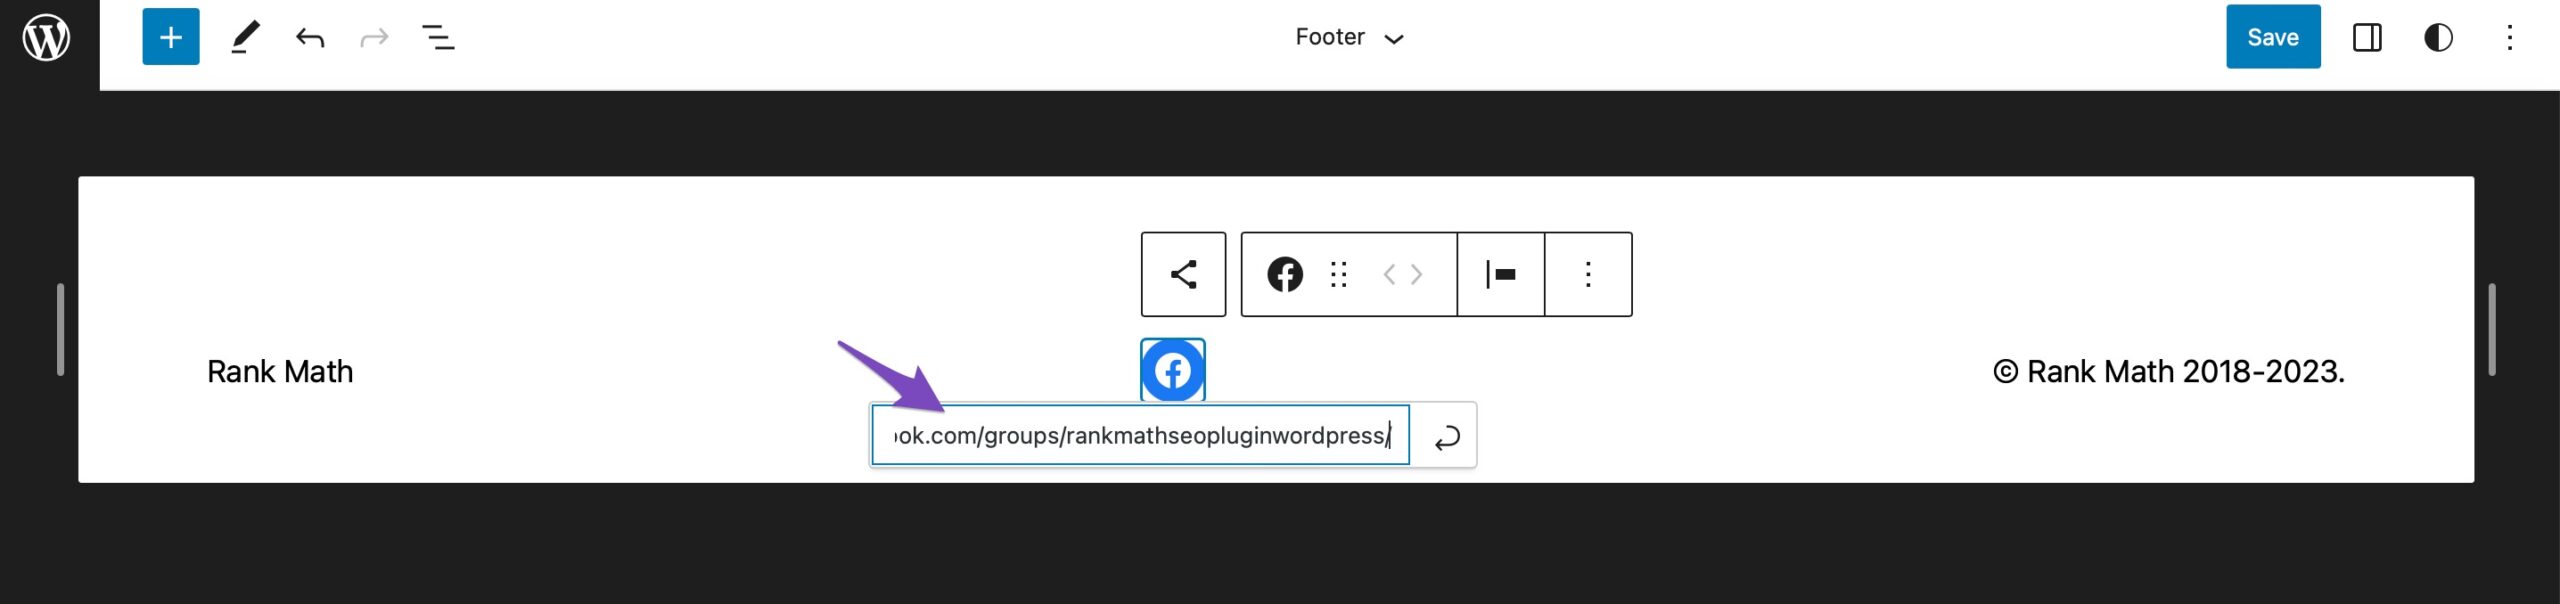 Add URL to social icons